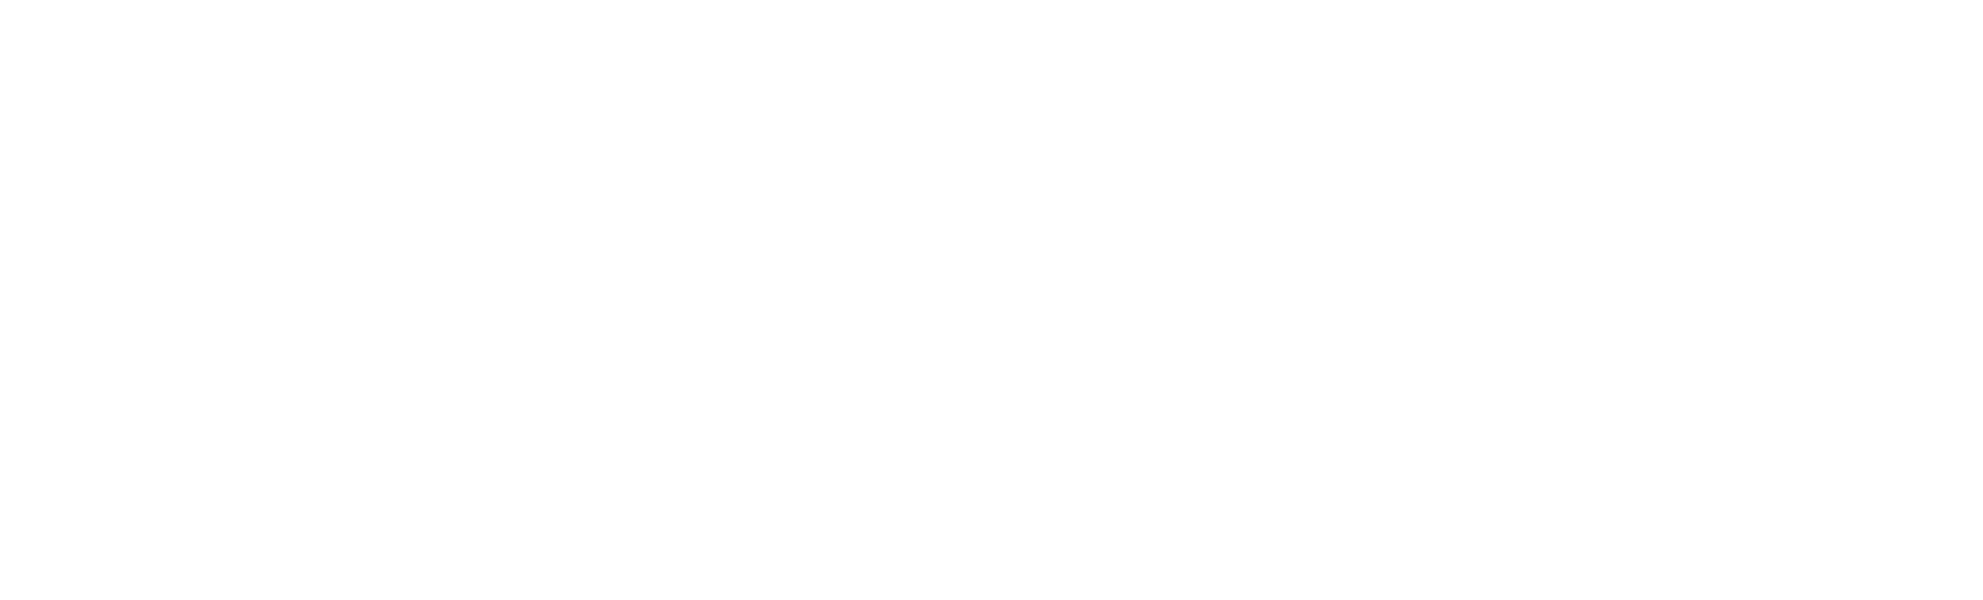 50BEST Discovery